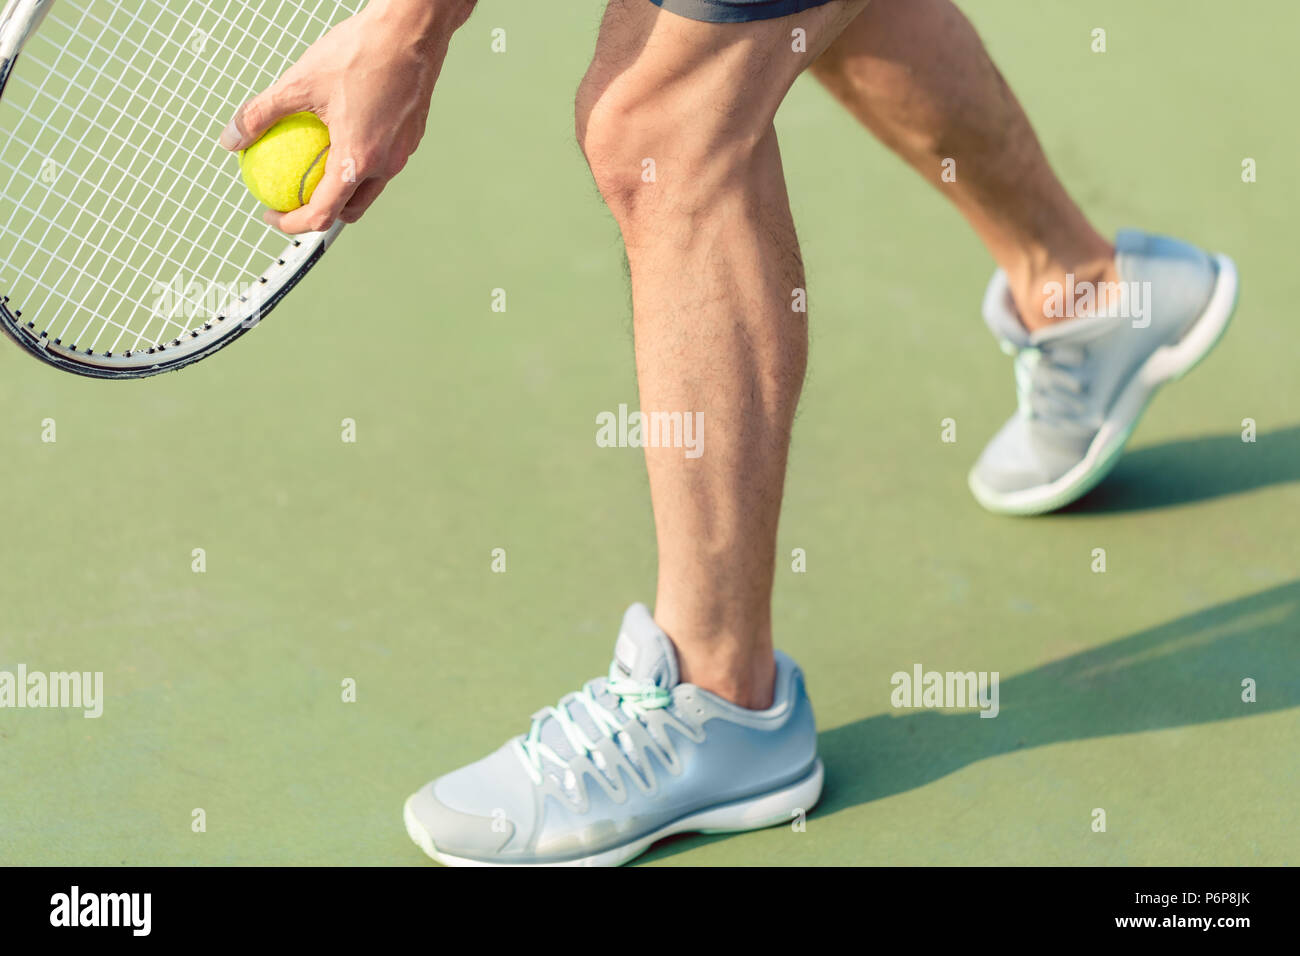 Low section of a professional player holding ball and tennis racket Stock Photo